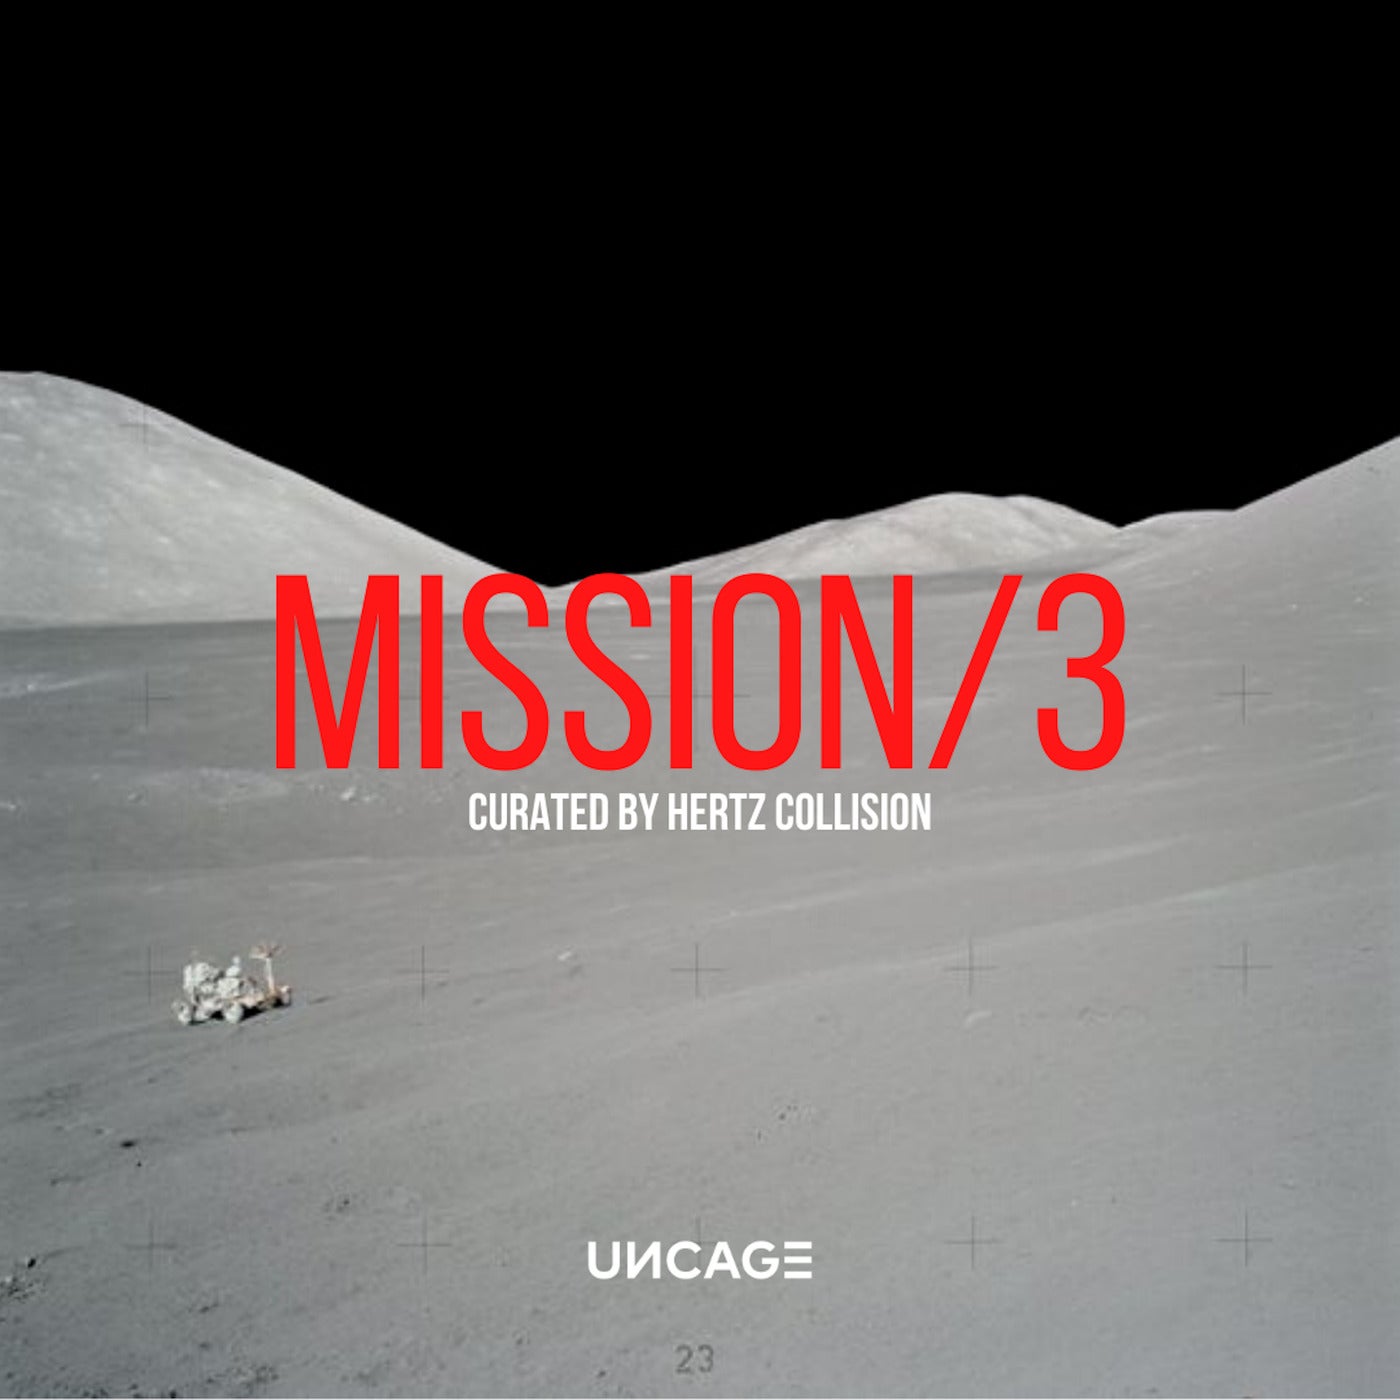 Download UNCAGE MISSION 03 (Curated by Hertz Collision) on Electrobuzz